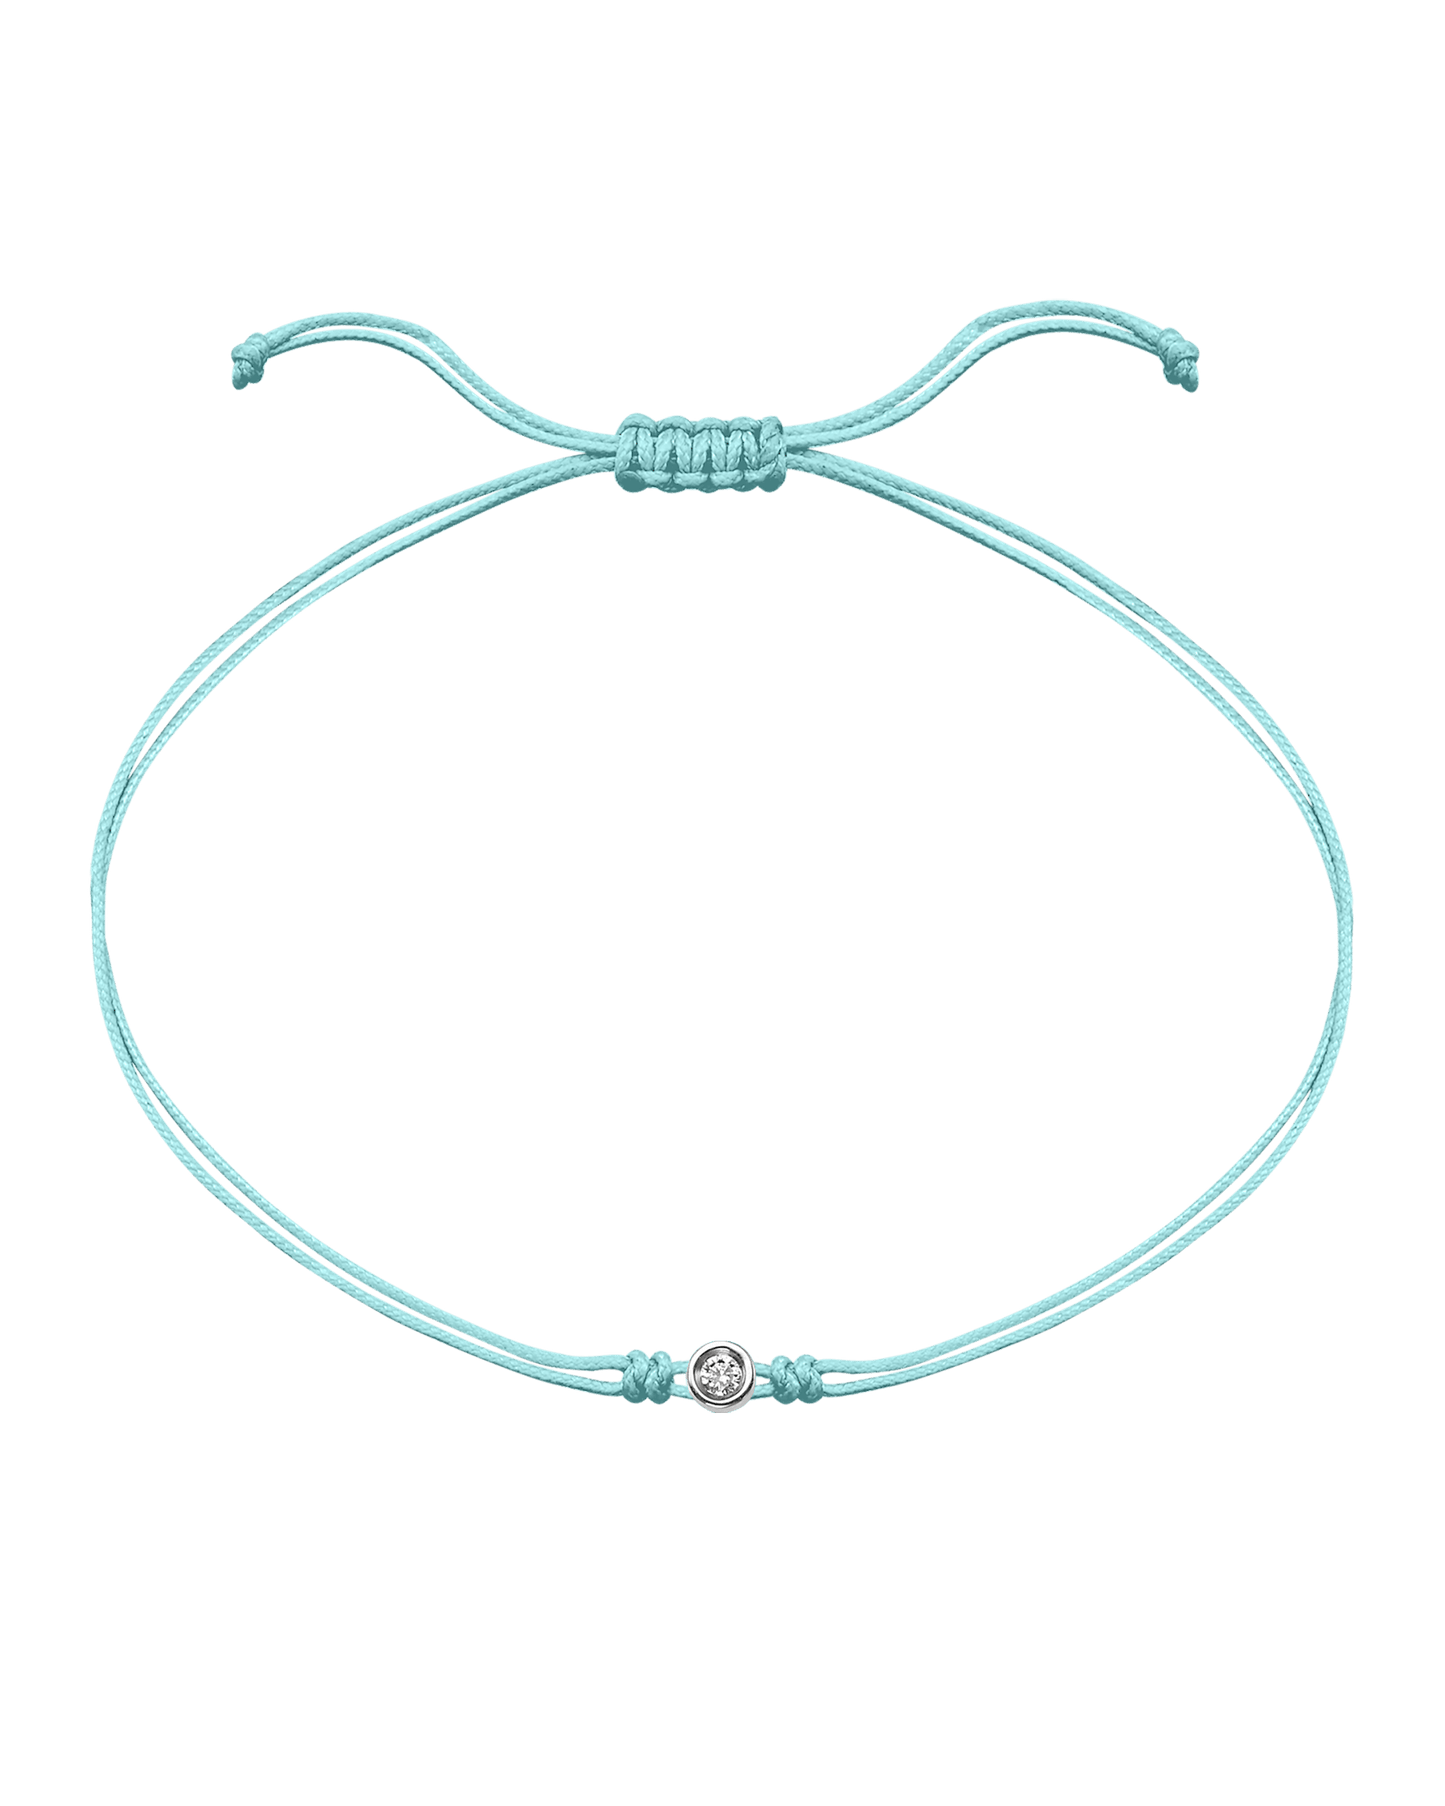 Summer Edition : The Classic String of Love - 14K White Gold Bracelets magal-dev Frozen Blue Daiquiri - Turquoise Small: 0.03ct 